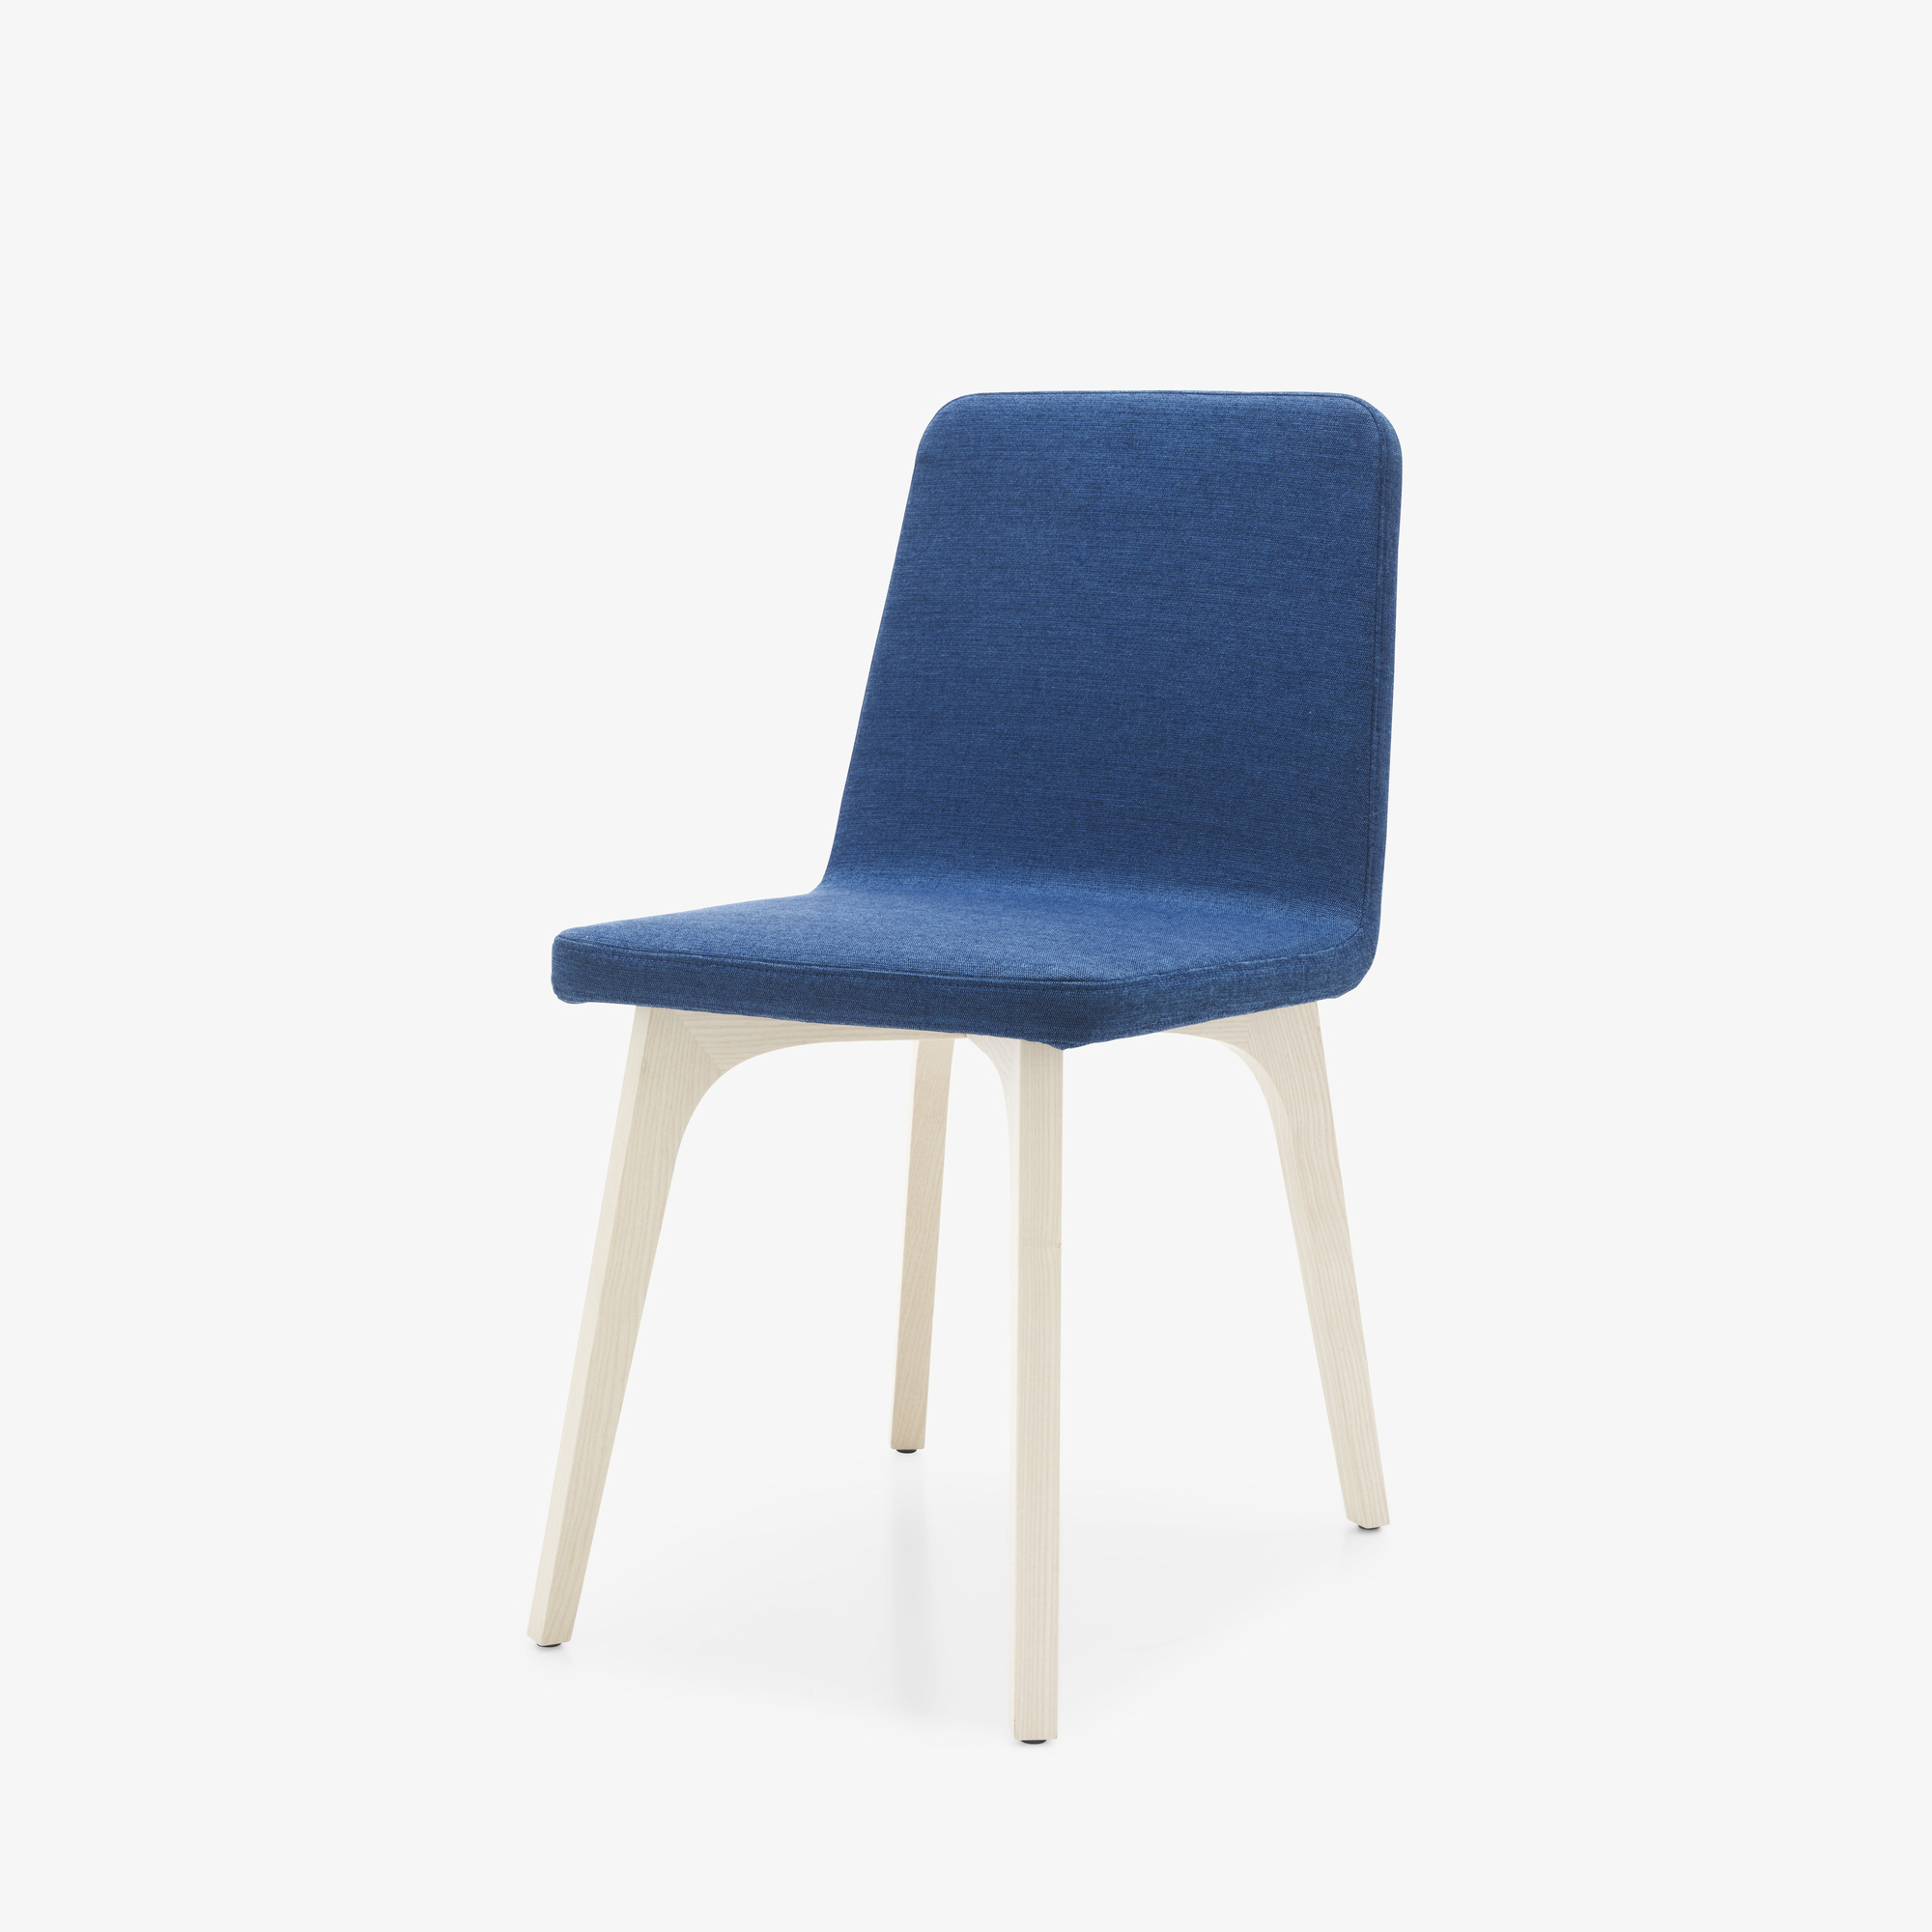 Image Dining chair wooden base 6